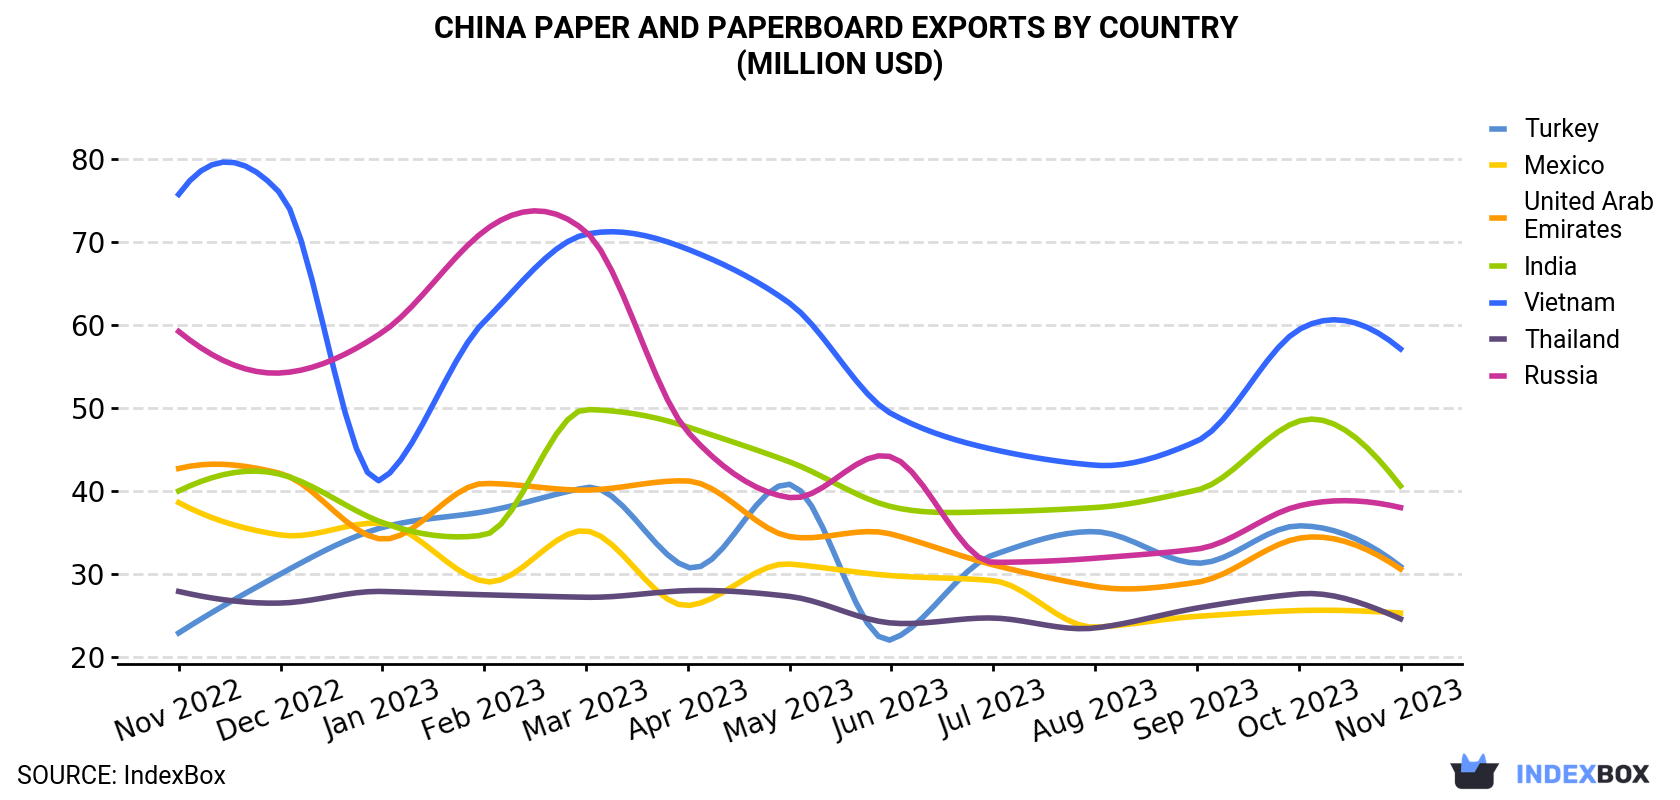 China Paper and Paperboard Exports By Country (Million USD)